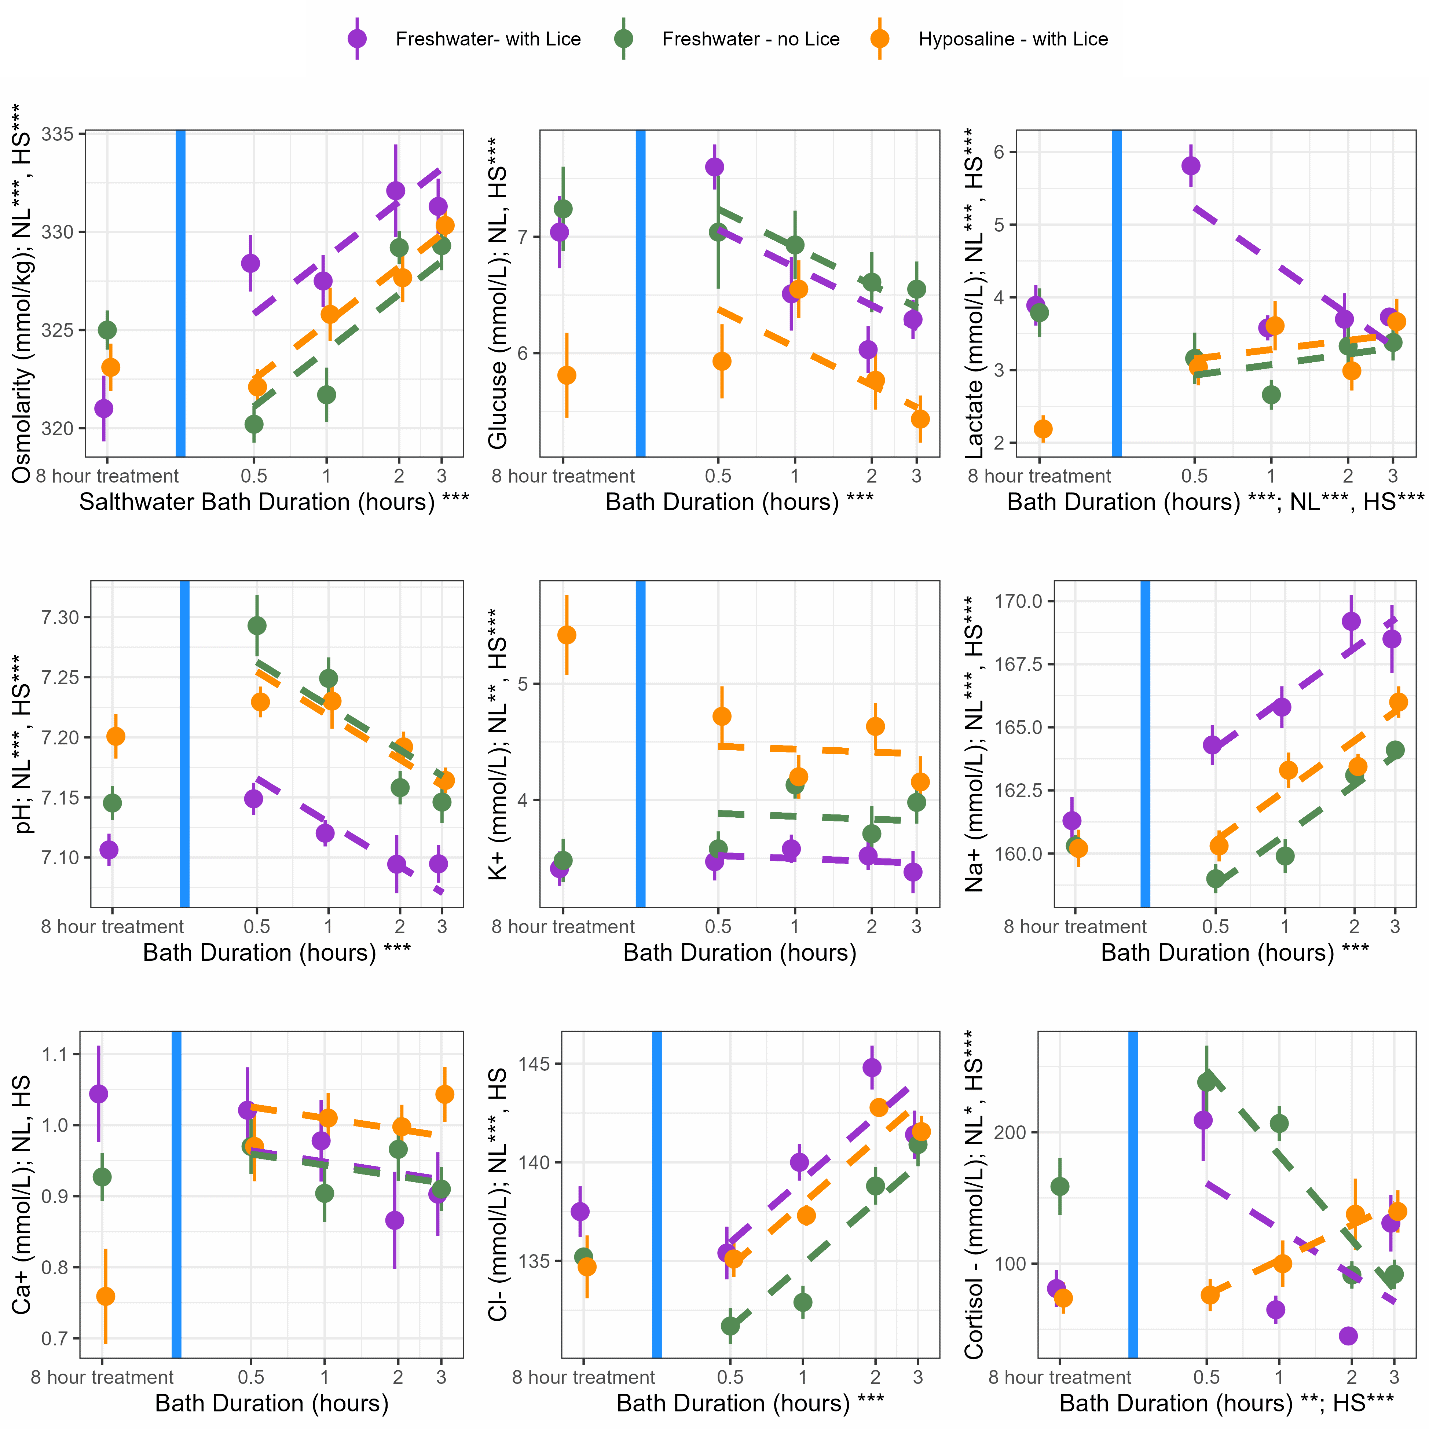 A figure with 9 subplots. Plots show the mean measurement of the blood parameter at that bath duration. The data points are separated by treatment type. Here is a table of all the mean data points in the plot. 

Treatment	Bath Duration (minutes)	Osmolarity (mmol/kg); NL***, HS***	Glucuse (mmol/L); NL*, HS***"	Lactate (mmol/L); NL, HS	pH; NL***, HS***	K+ (mmol/L); NL***, HS***	Na+ (mmol/L); NL, HS	Cl- (mmol/L); NL**, HS	Ca+ (mmol/L); NL*, HS***	Cortisol_(mmol/L); NL, HS
Freshwater_Lice	0	321	7.04	3.89	7.11	3.41	161	138	1.04	81
Freshwater_Lice	30	328	7.60	5.81	7.15	3.47	164	135	1.02	209
Freshwater_Lice	60	328	6.51	3.58	7.12	3.58	166	140	0.98	65
Freshwater_Lice	120	332	6.03	3.70	7.09	3.52	169	145	0.87	45
Freshwater_Lice	180	331	6.29	3.73	7.09	3.38	169	141	0.90	131
Freshwater_No Lice	0	325	7.24	3.79	7.15	3.48	160	135	0.93	159
Freshwater_No Lice	30	320	7.04	3.16	7.29	3.58	159	132	0.97	238
Freshwater_No Lice	60	322	6.93	2.66	7.25	4.13	160	133	0.90	207
Freshwater_No Lice	120	329	6.61	3.33	7.16	3.71	163	139	0.97	91
Freshwater_No Lice	180	329	6.55	3.38	7.15	3.98	164	141	0.91	92
Hyposaline_Lice	0	323	5.81	2.19	7.20	5.42	160	135	0.76	74
Hyposaline_Lice	30	322	5.93	3.04	7.23	4.72	160	135	0.97	76
Hyposaline_Lice	60	326	6.55	3.61	7.23	4.20	163	137	1.01	100
Hyposaline_Lice	120	328	5.77	2.99	7.19	4.63	163	143	1.00	138
Hyposaline_Lice	180	330	5.43	3.67	7.16	4.16	166	142	1.04	140
